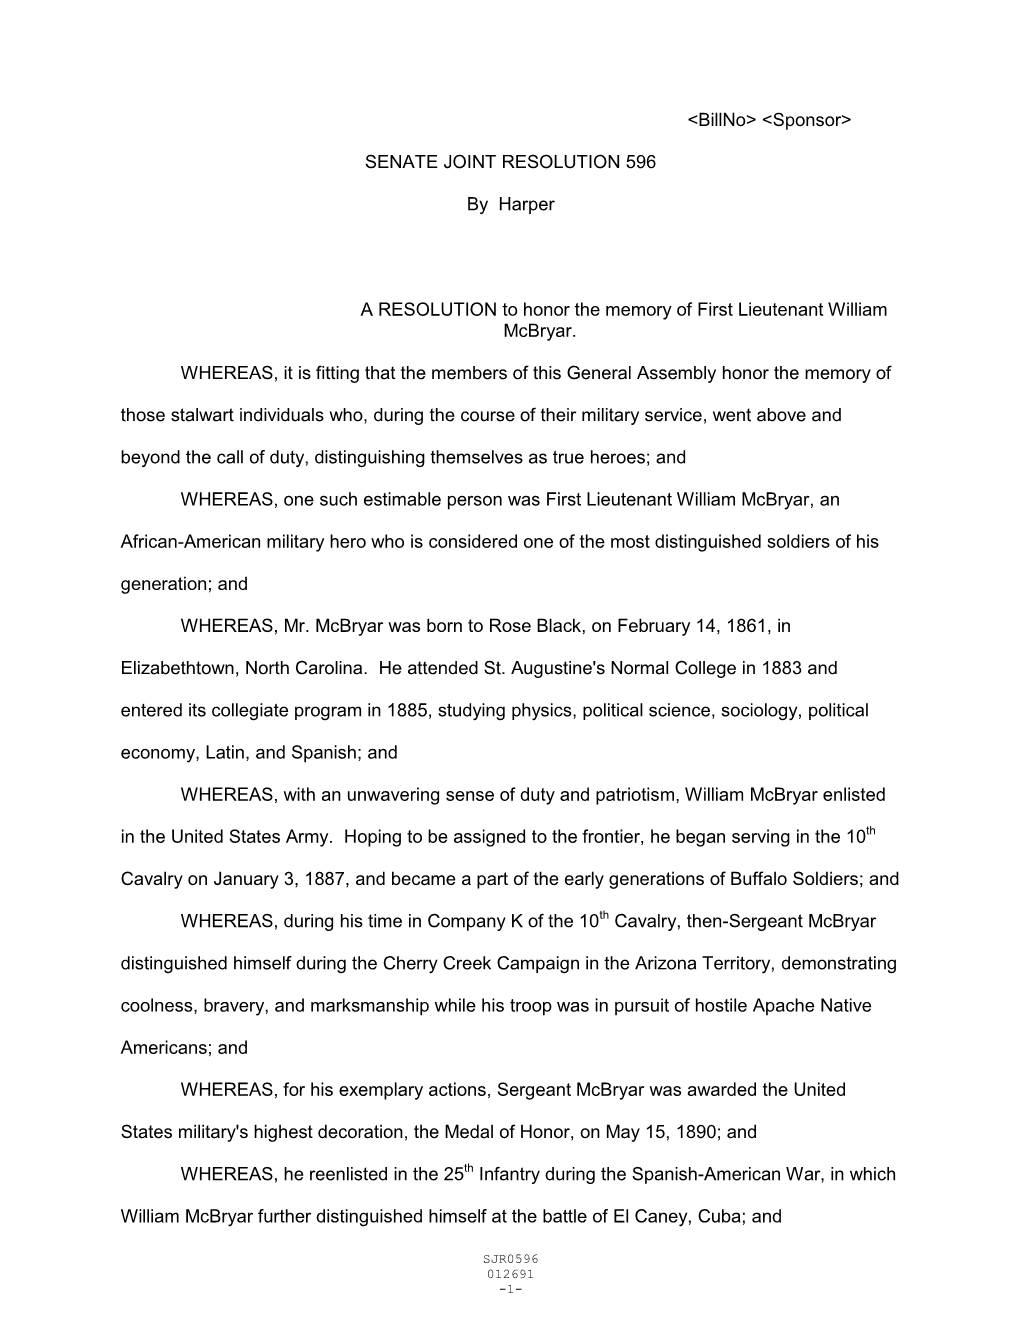 &lt;Billno&gt; &lt;Sponsor&gt; SENATE JOINT RESOLUTION 596 by Harper a RESOLUTION to Honor the Memory of First Lieutenant Will